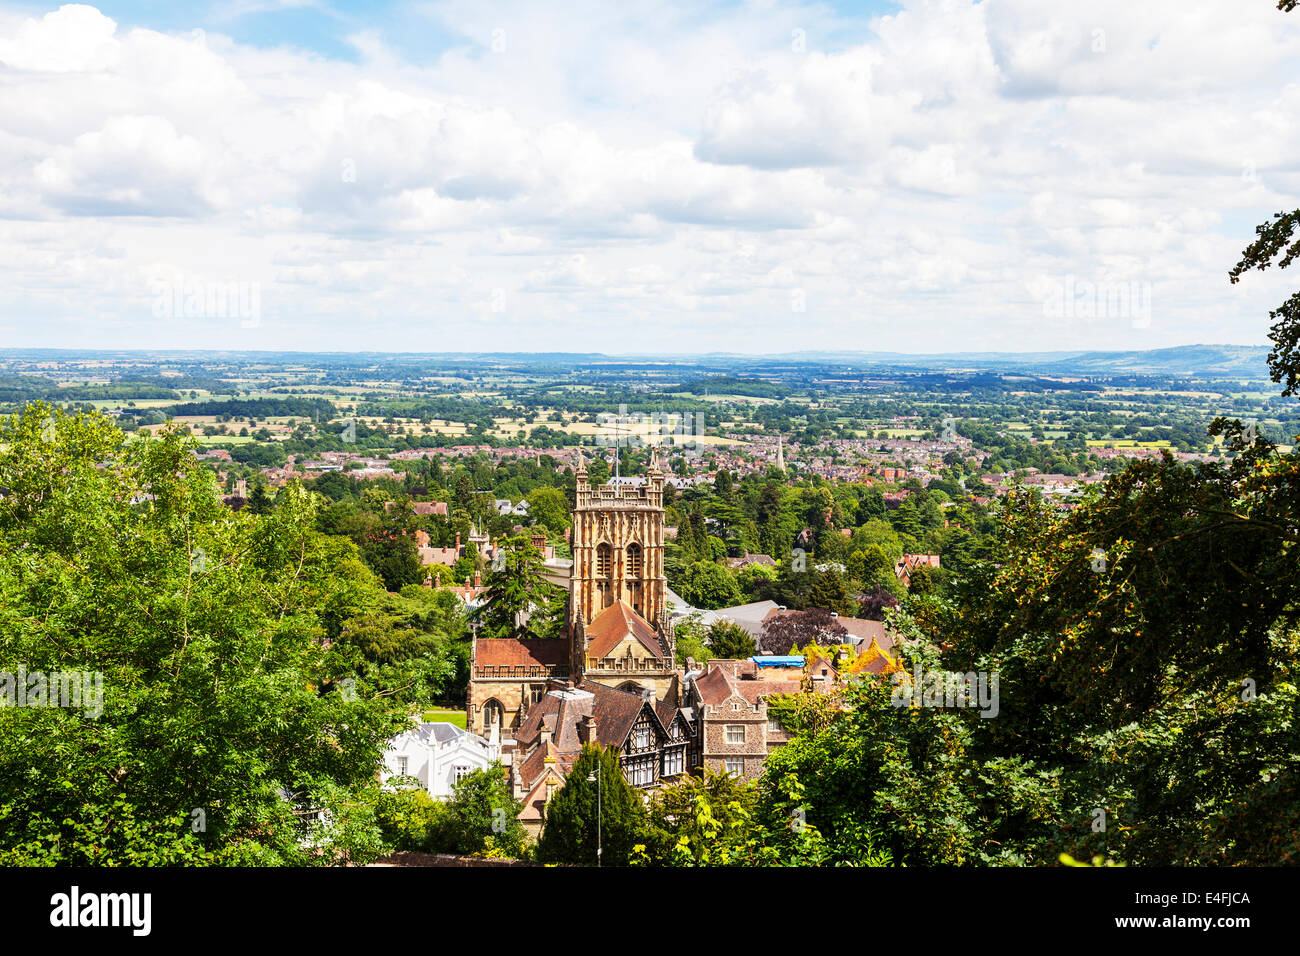 The Priory Church of St. Mary and St. Michael. Great Malvern Priory, now the parish church of spa town of Great Malvern, England Stock Photo